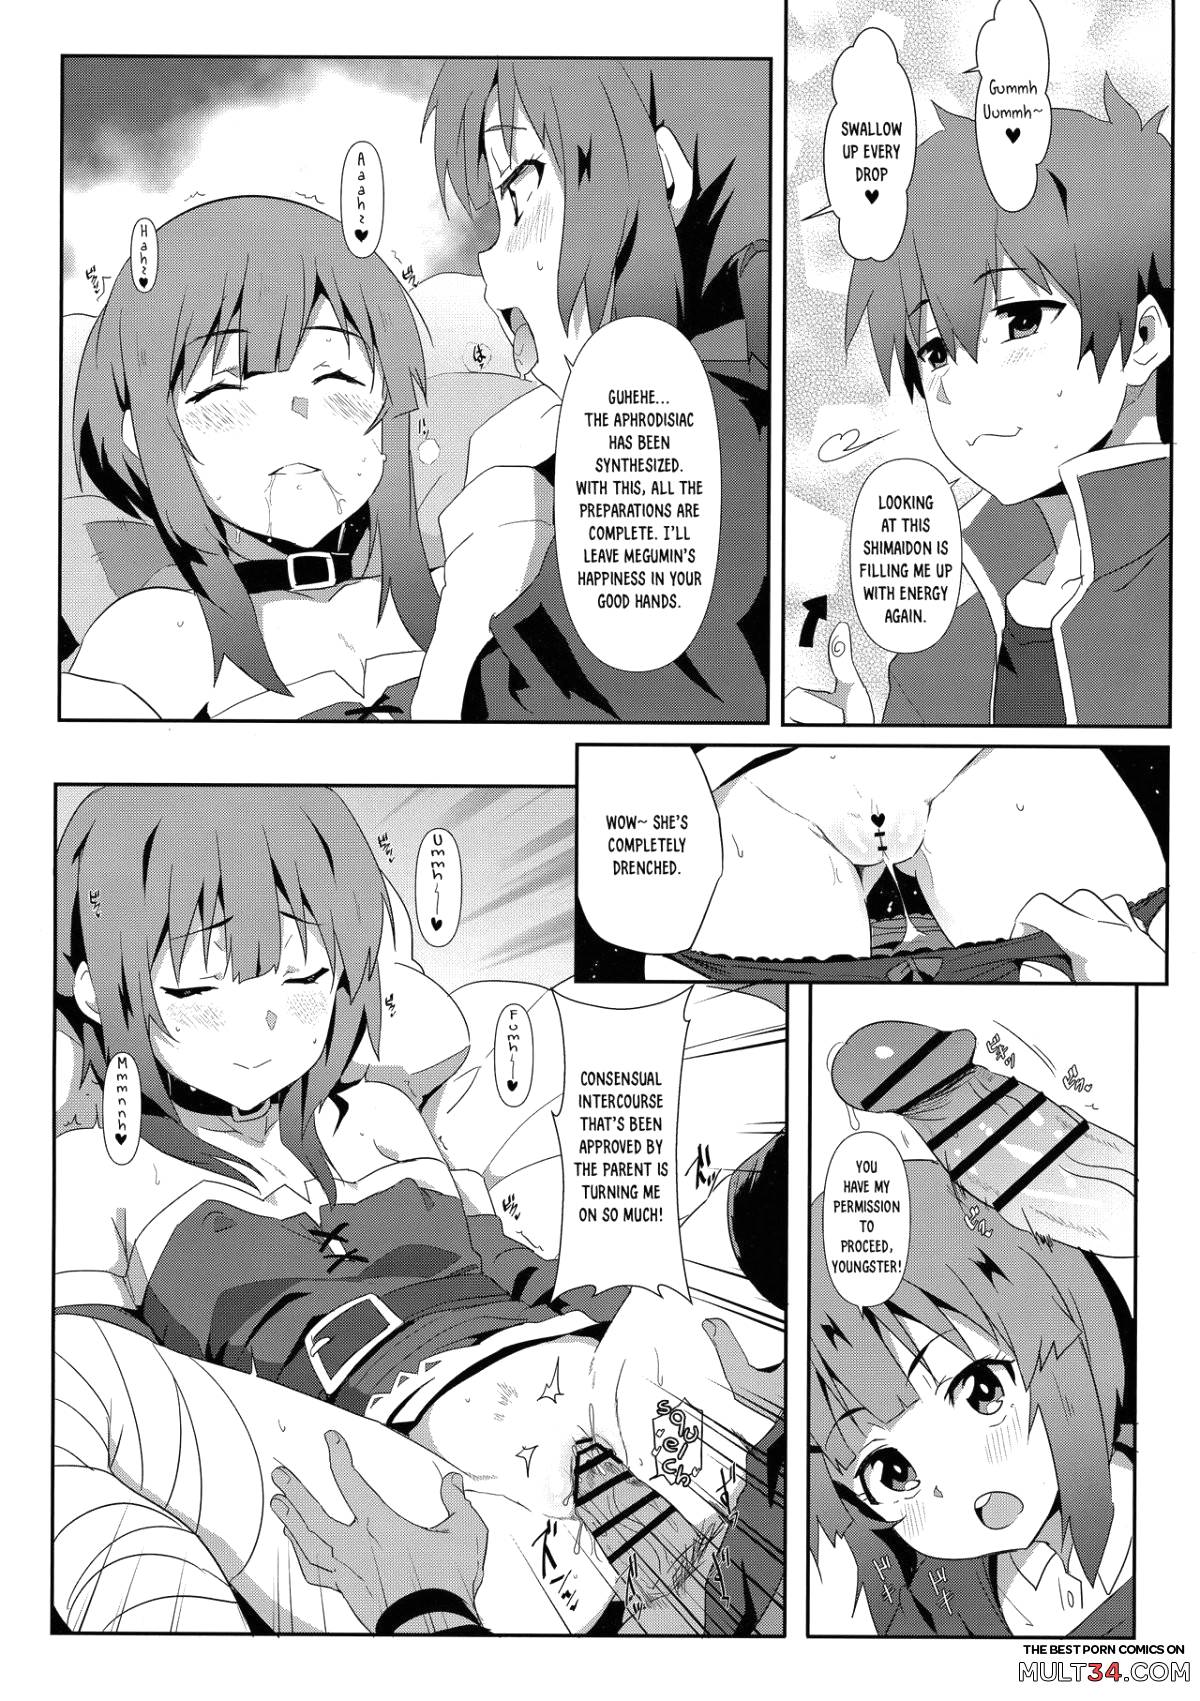 Blessing Megumin with a Magnificence Explosion! 6 page 12